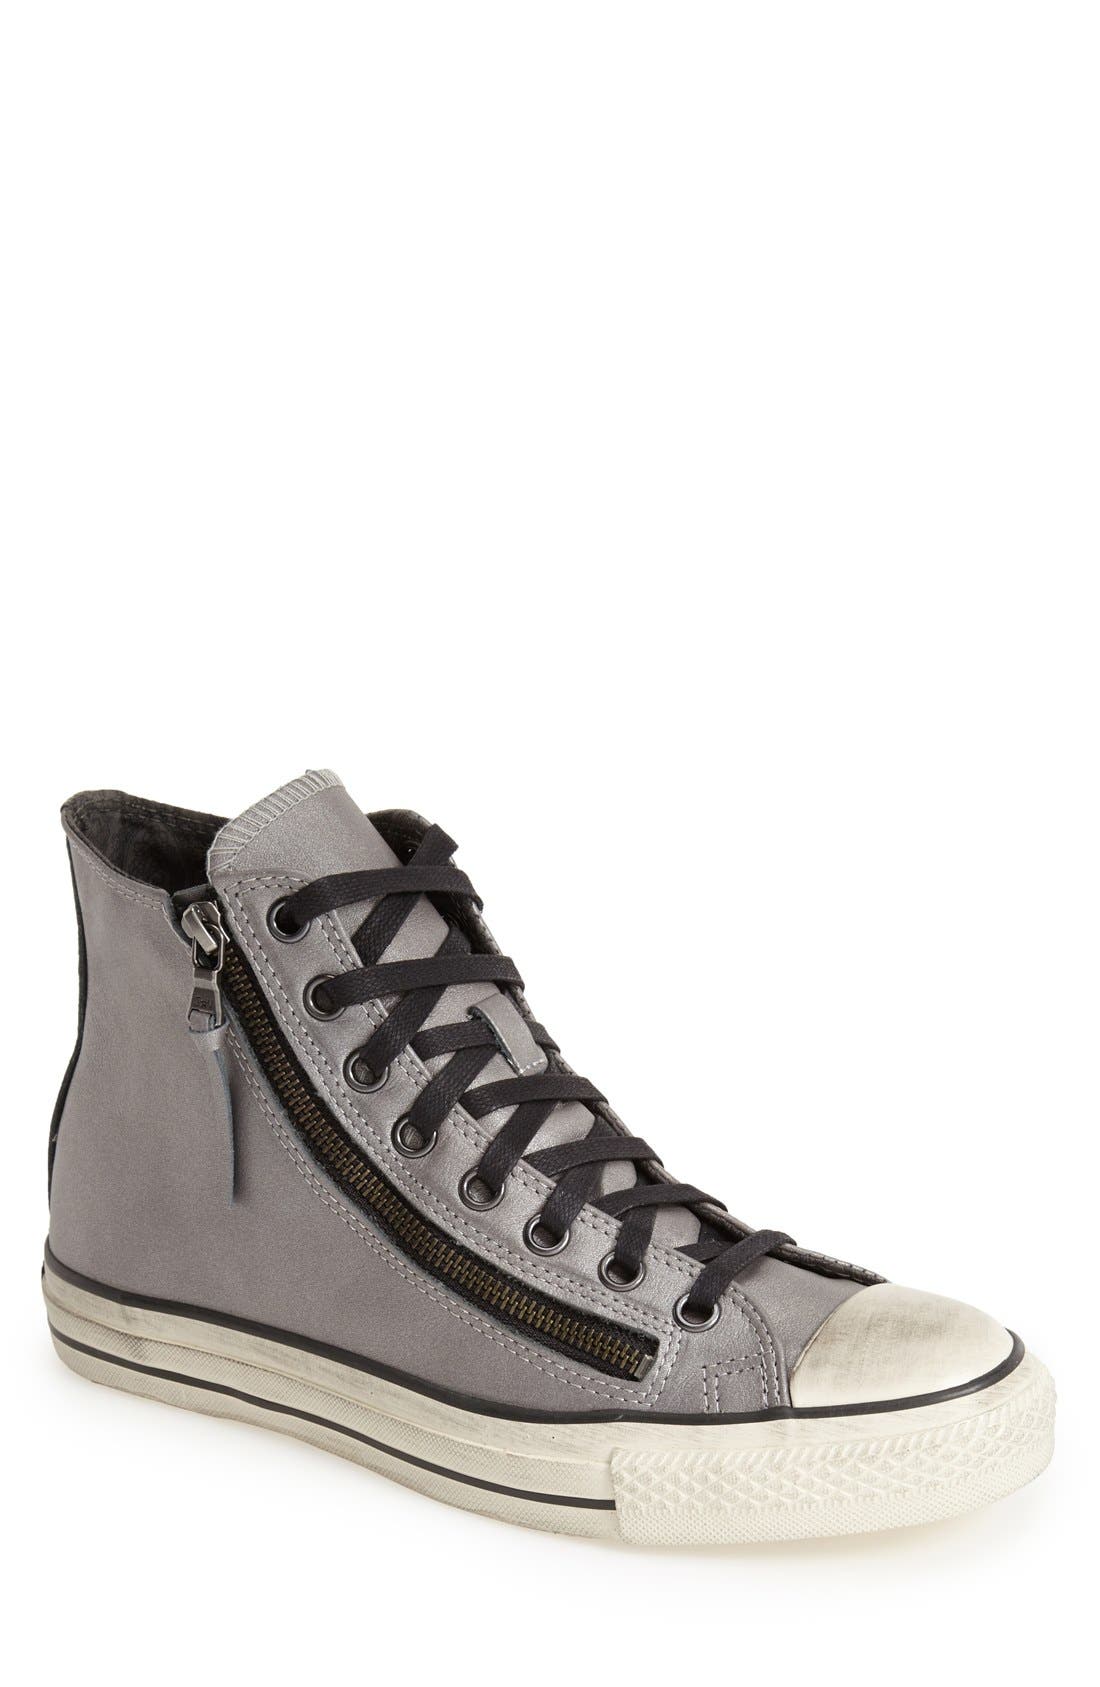 converse all star leather zip